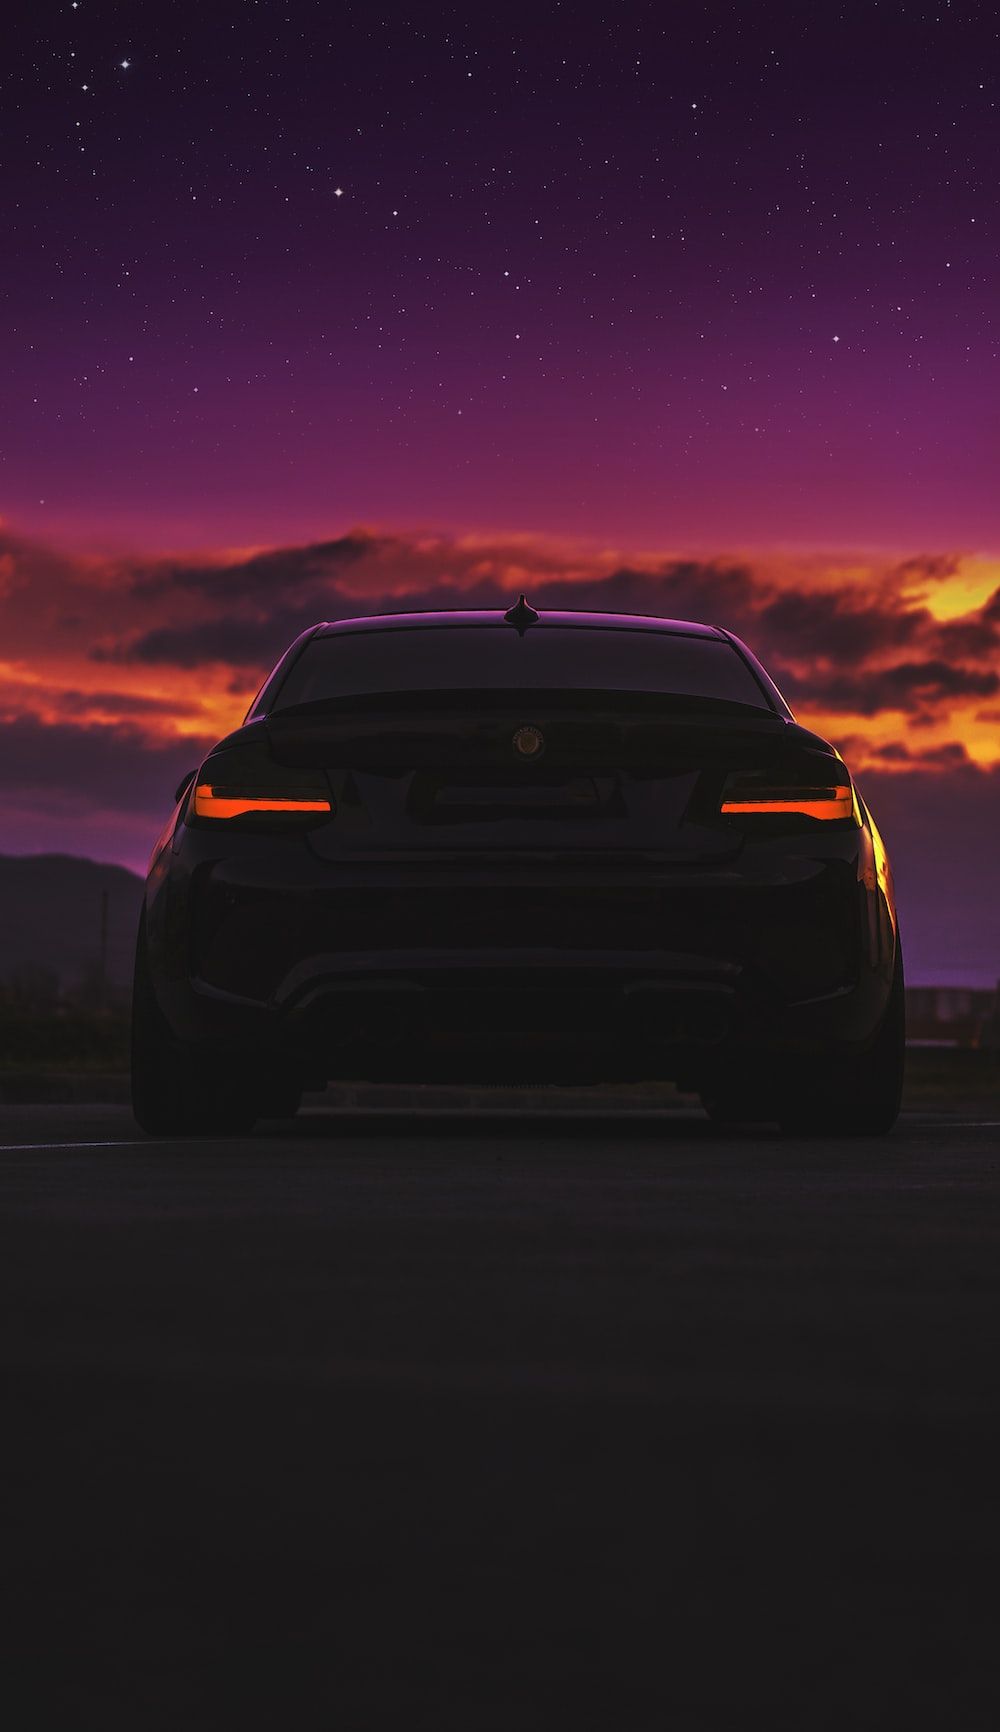 The back of a car on a road with a purple sky in the background - BMW